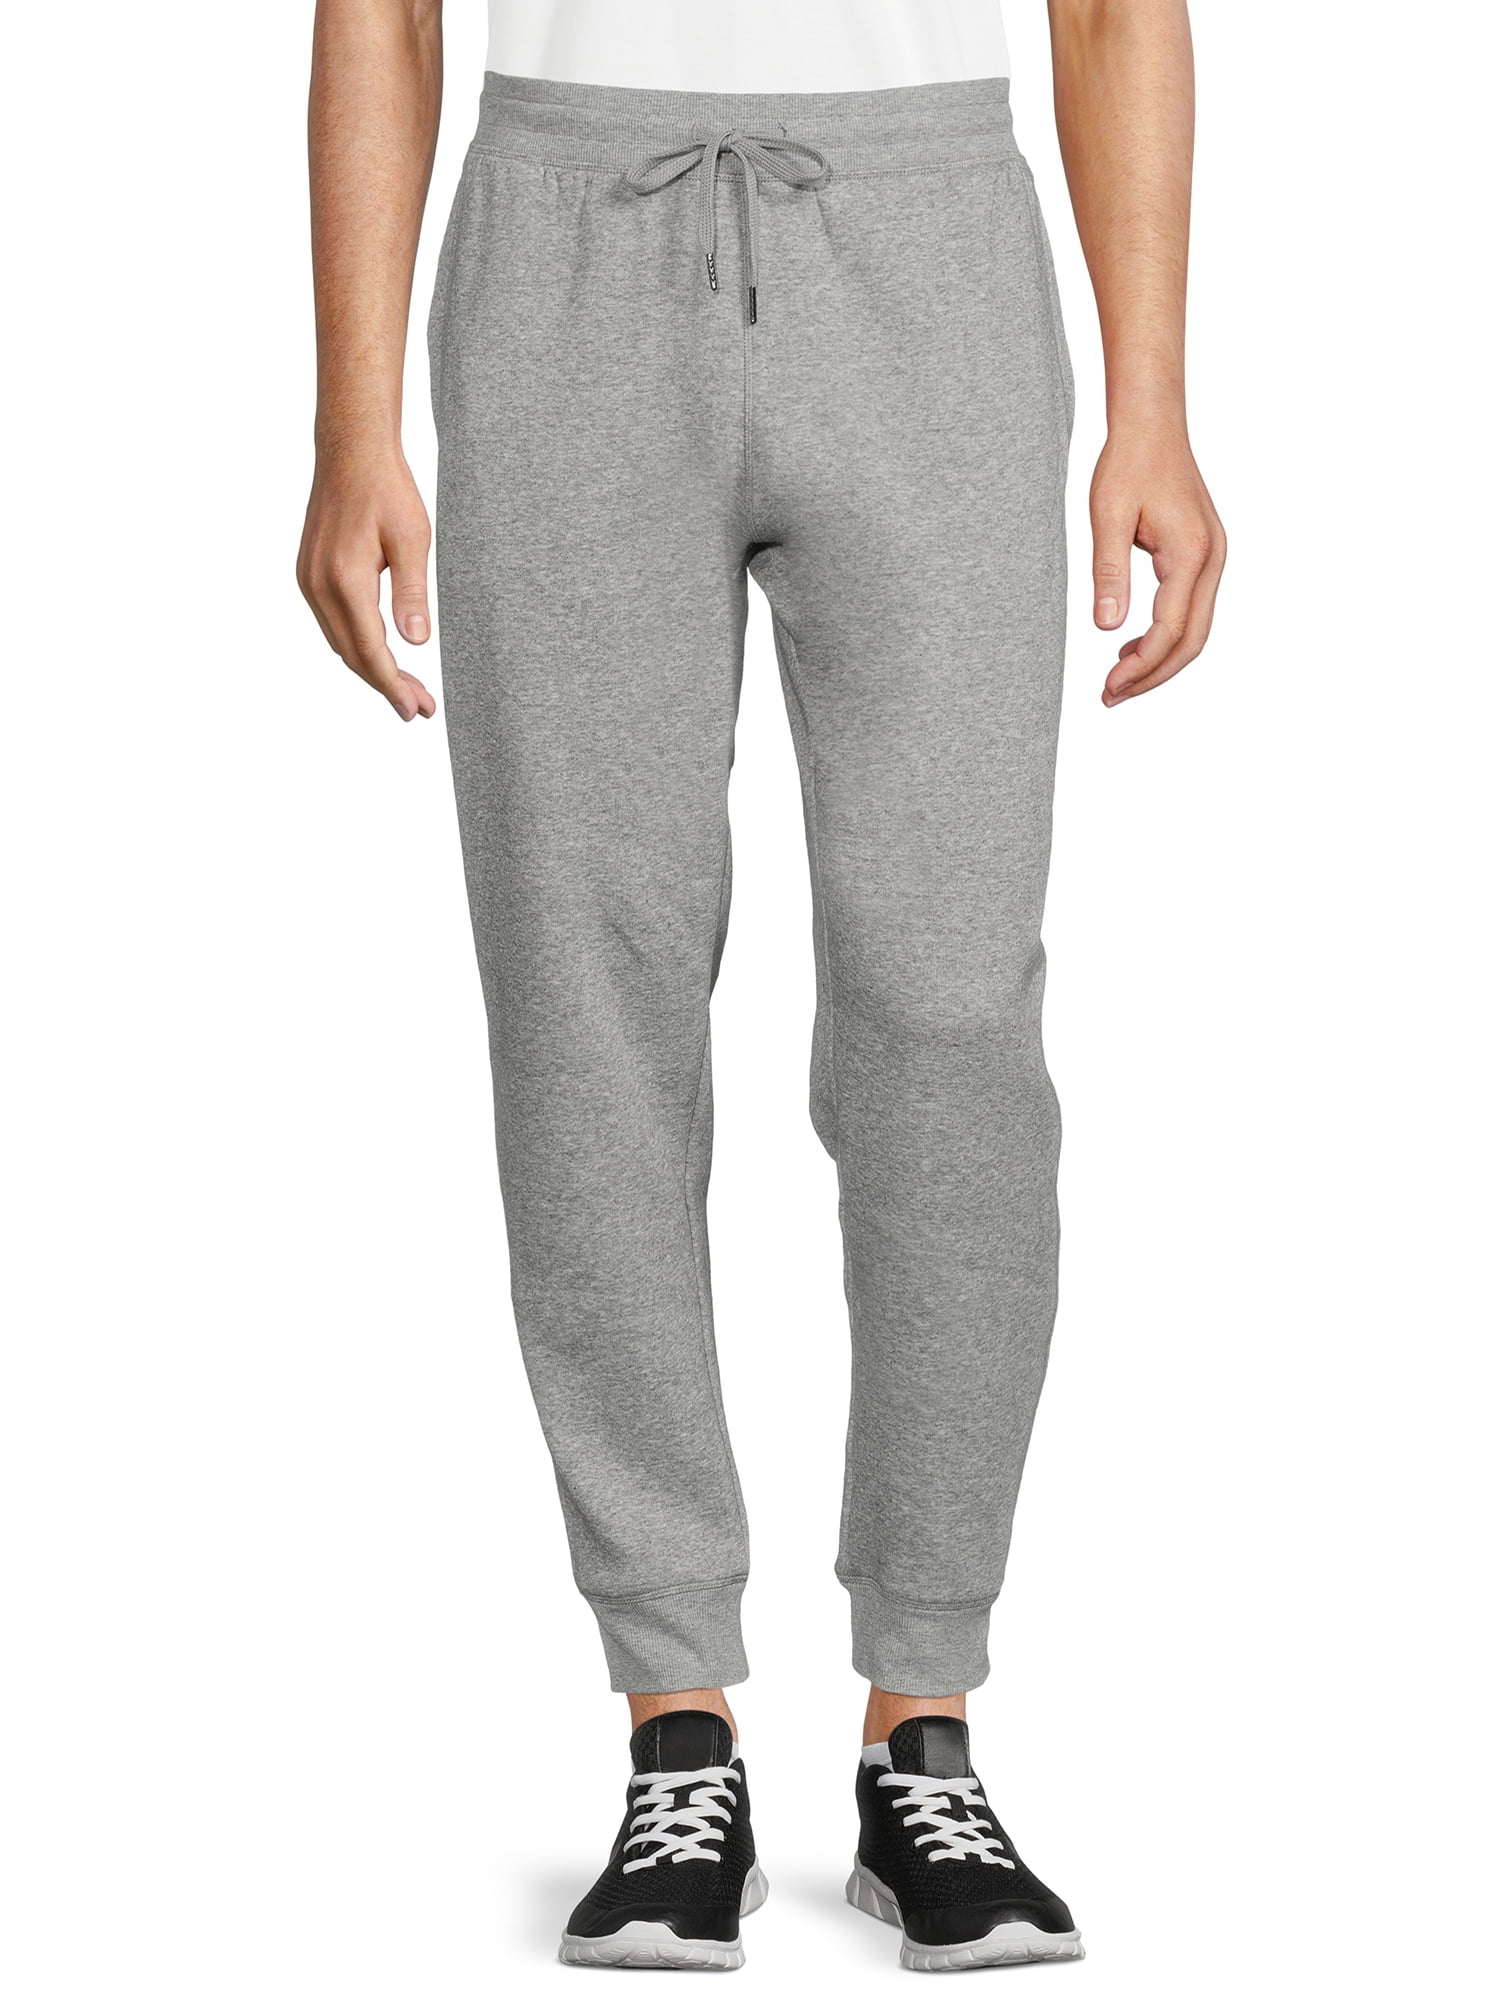 Russell Men's and Big Men's Fleece Jogger Pants, Sizes up to 3XL ...